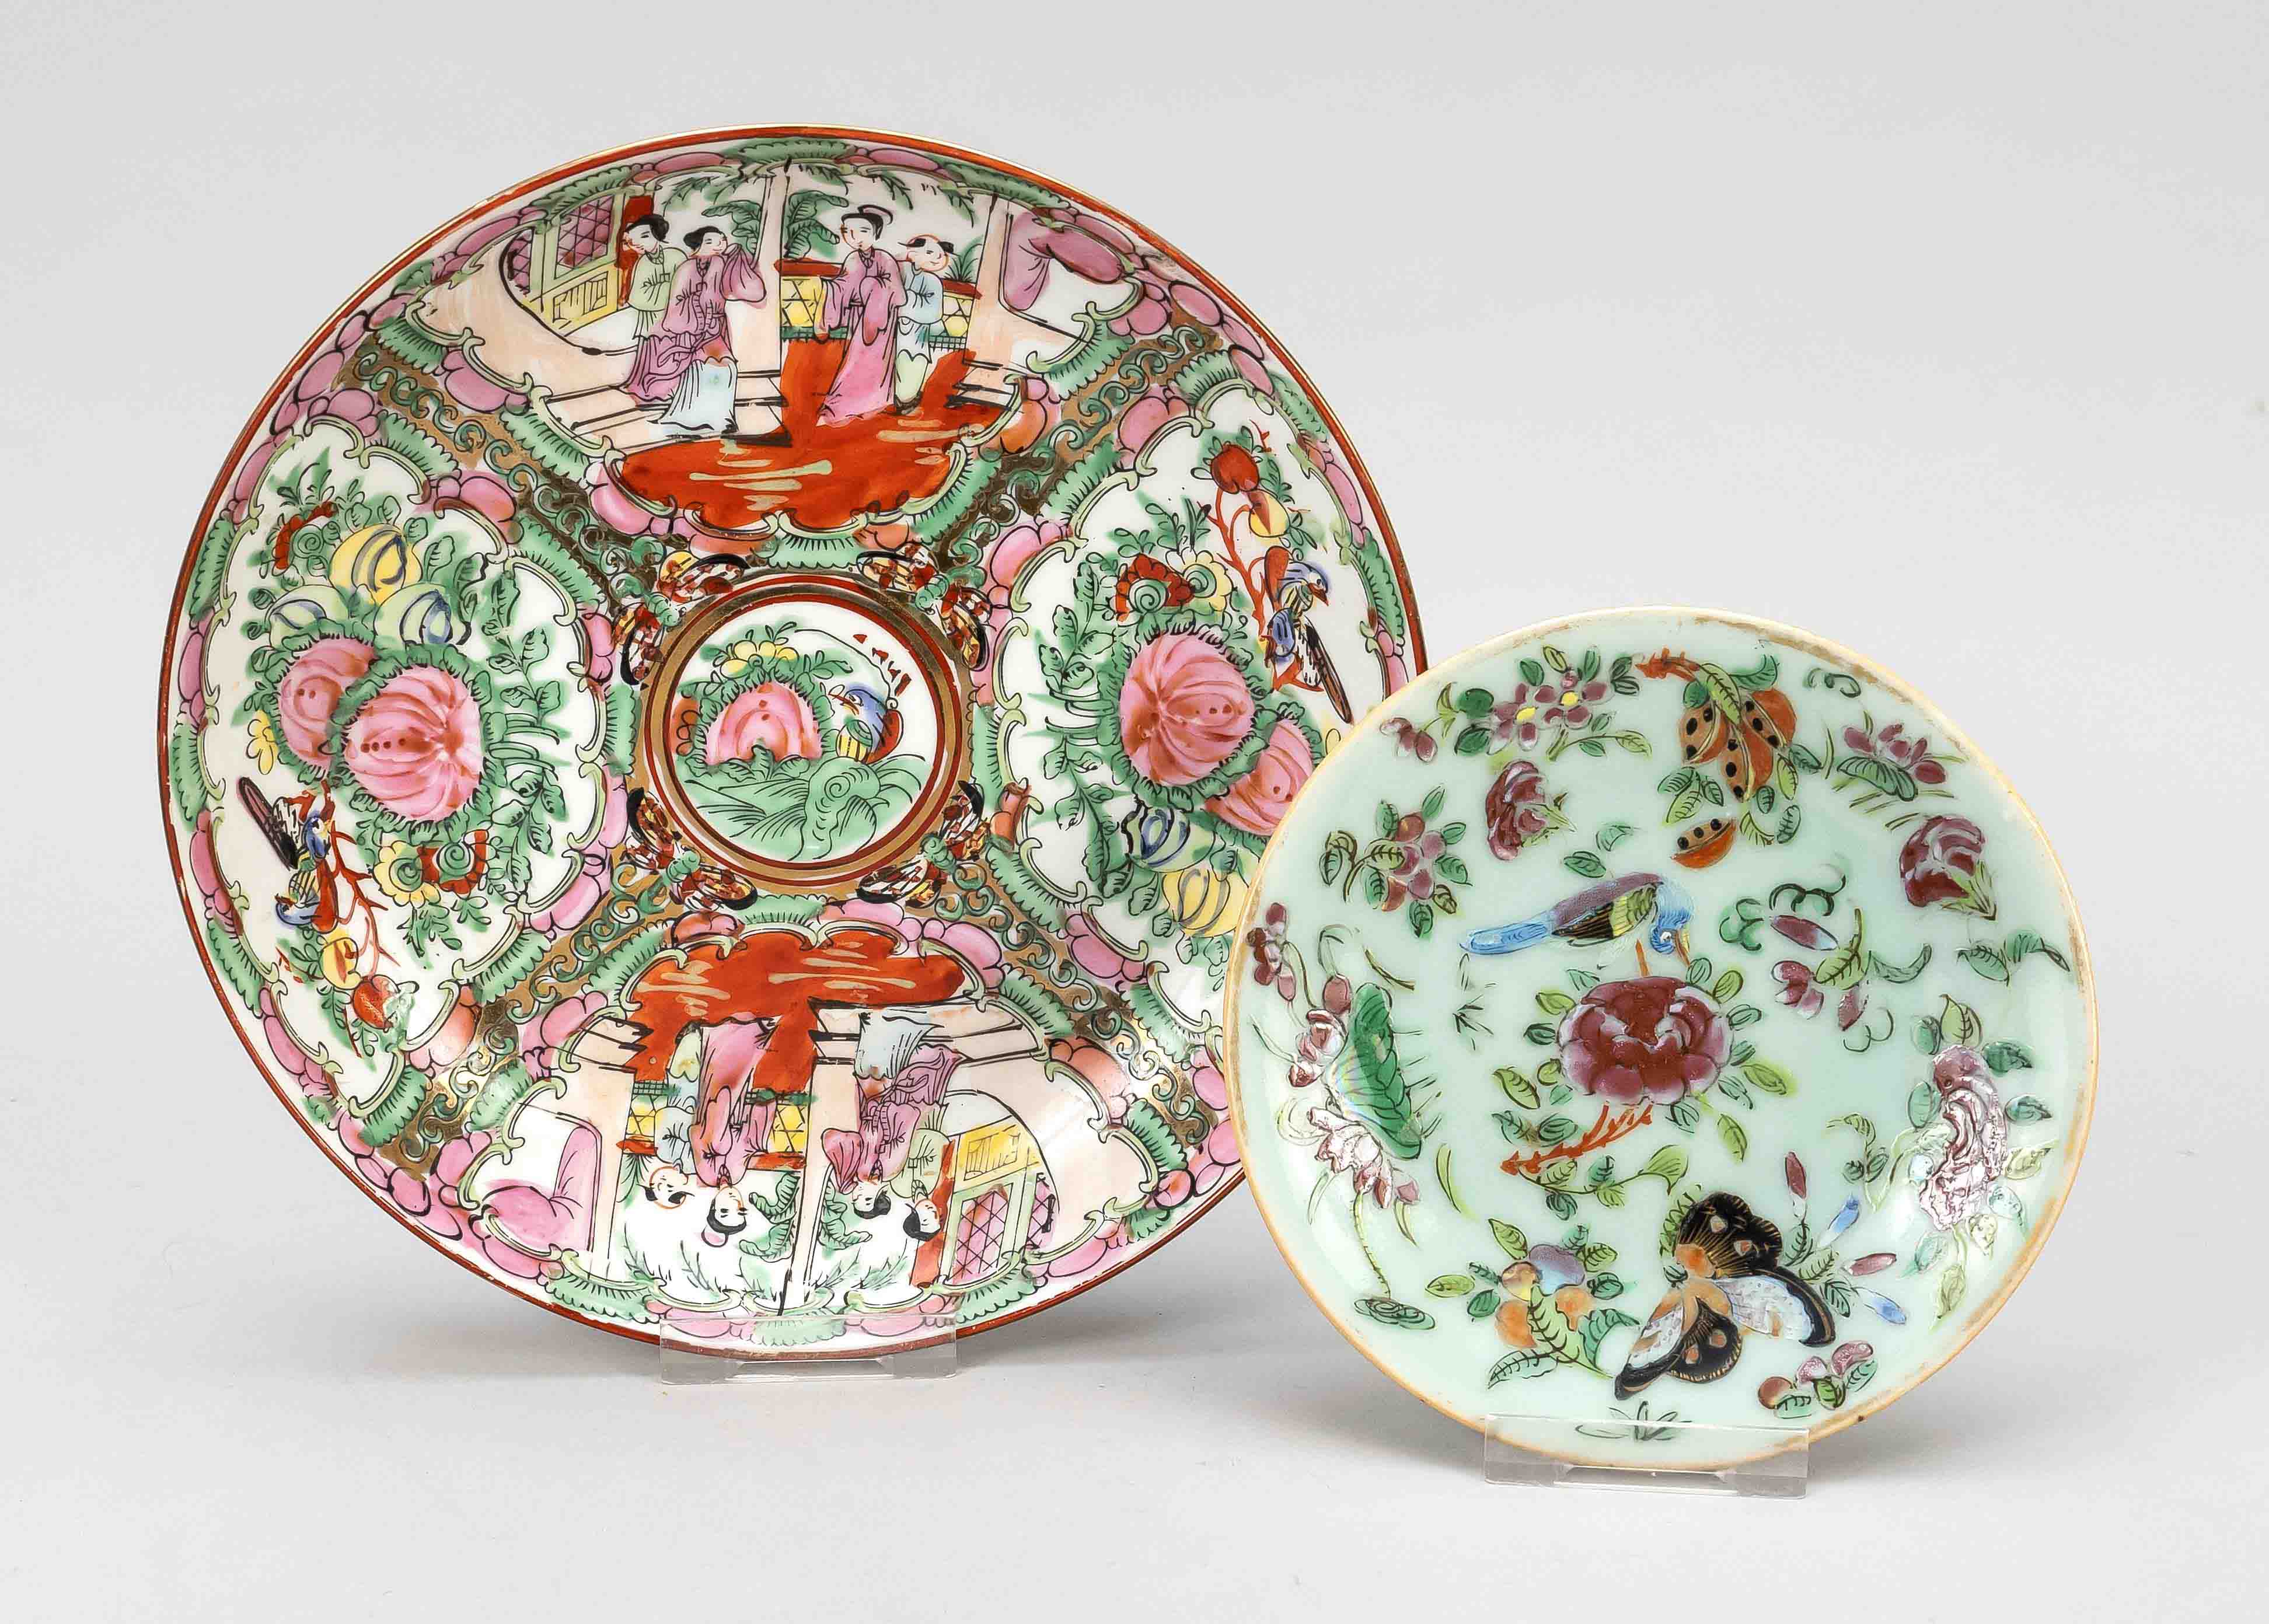 Plate duo Canton ware, China, Qing dynasty(1644-1912), 19th c., Macau and Canton; once porcelain